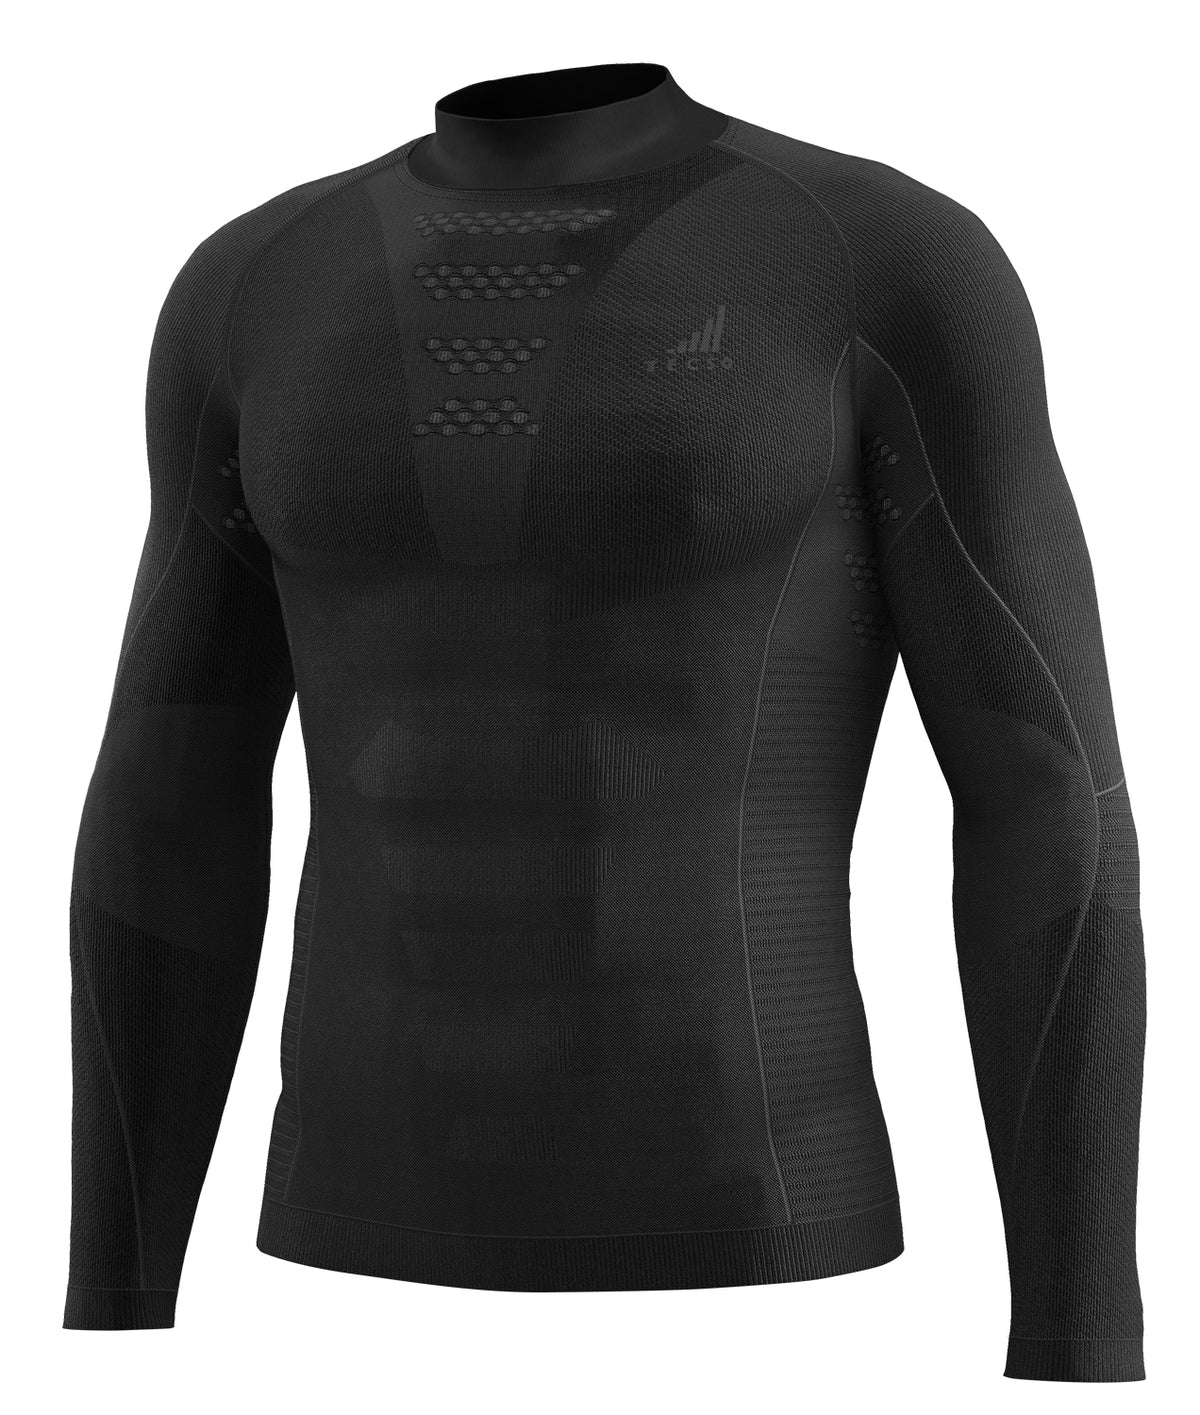 K-DRY BASE LAYER LUPETTO - LONG